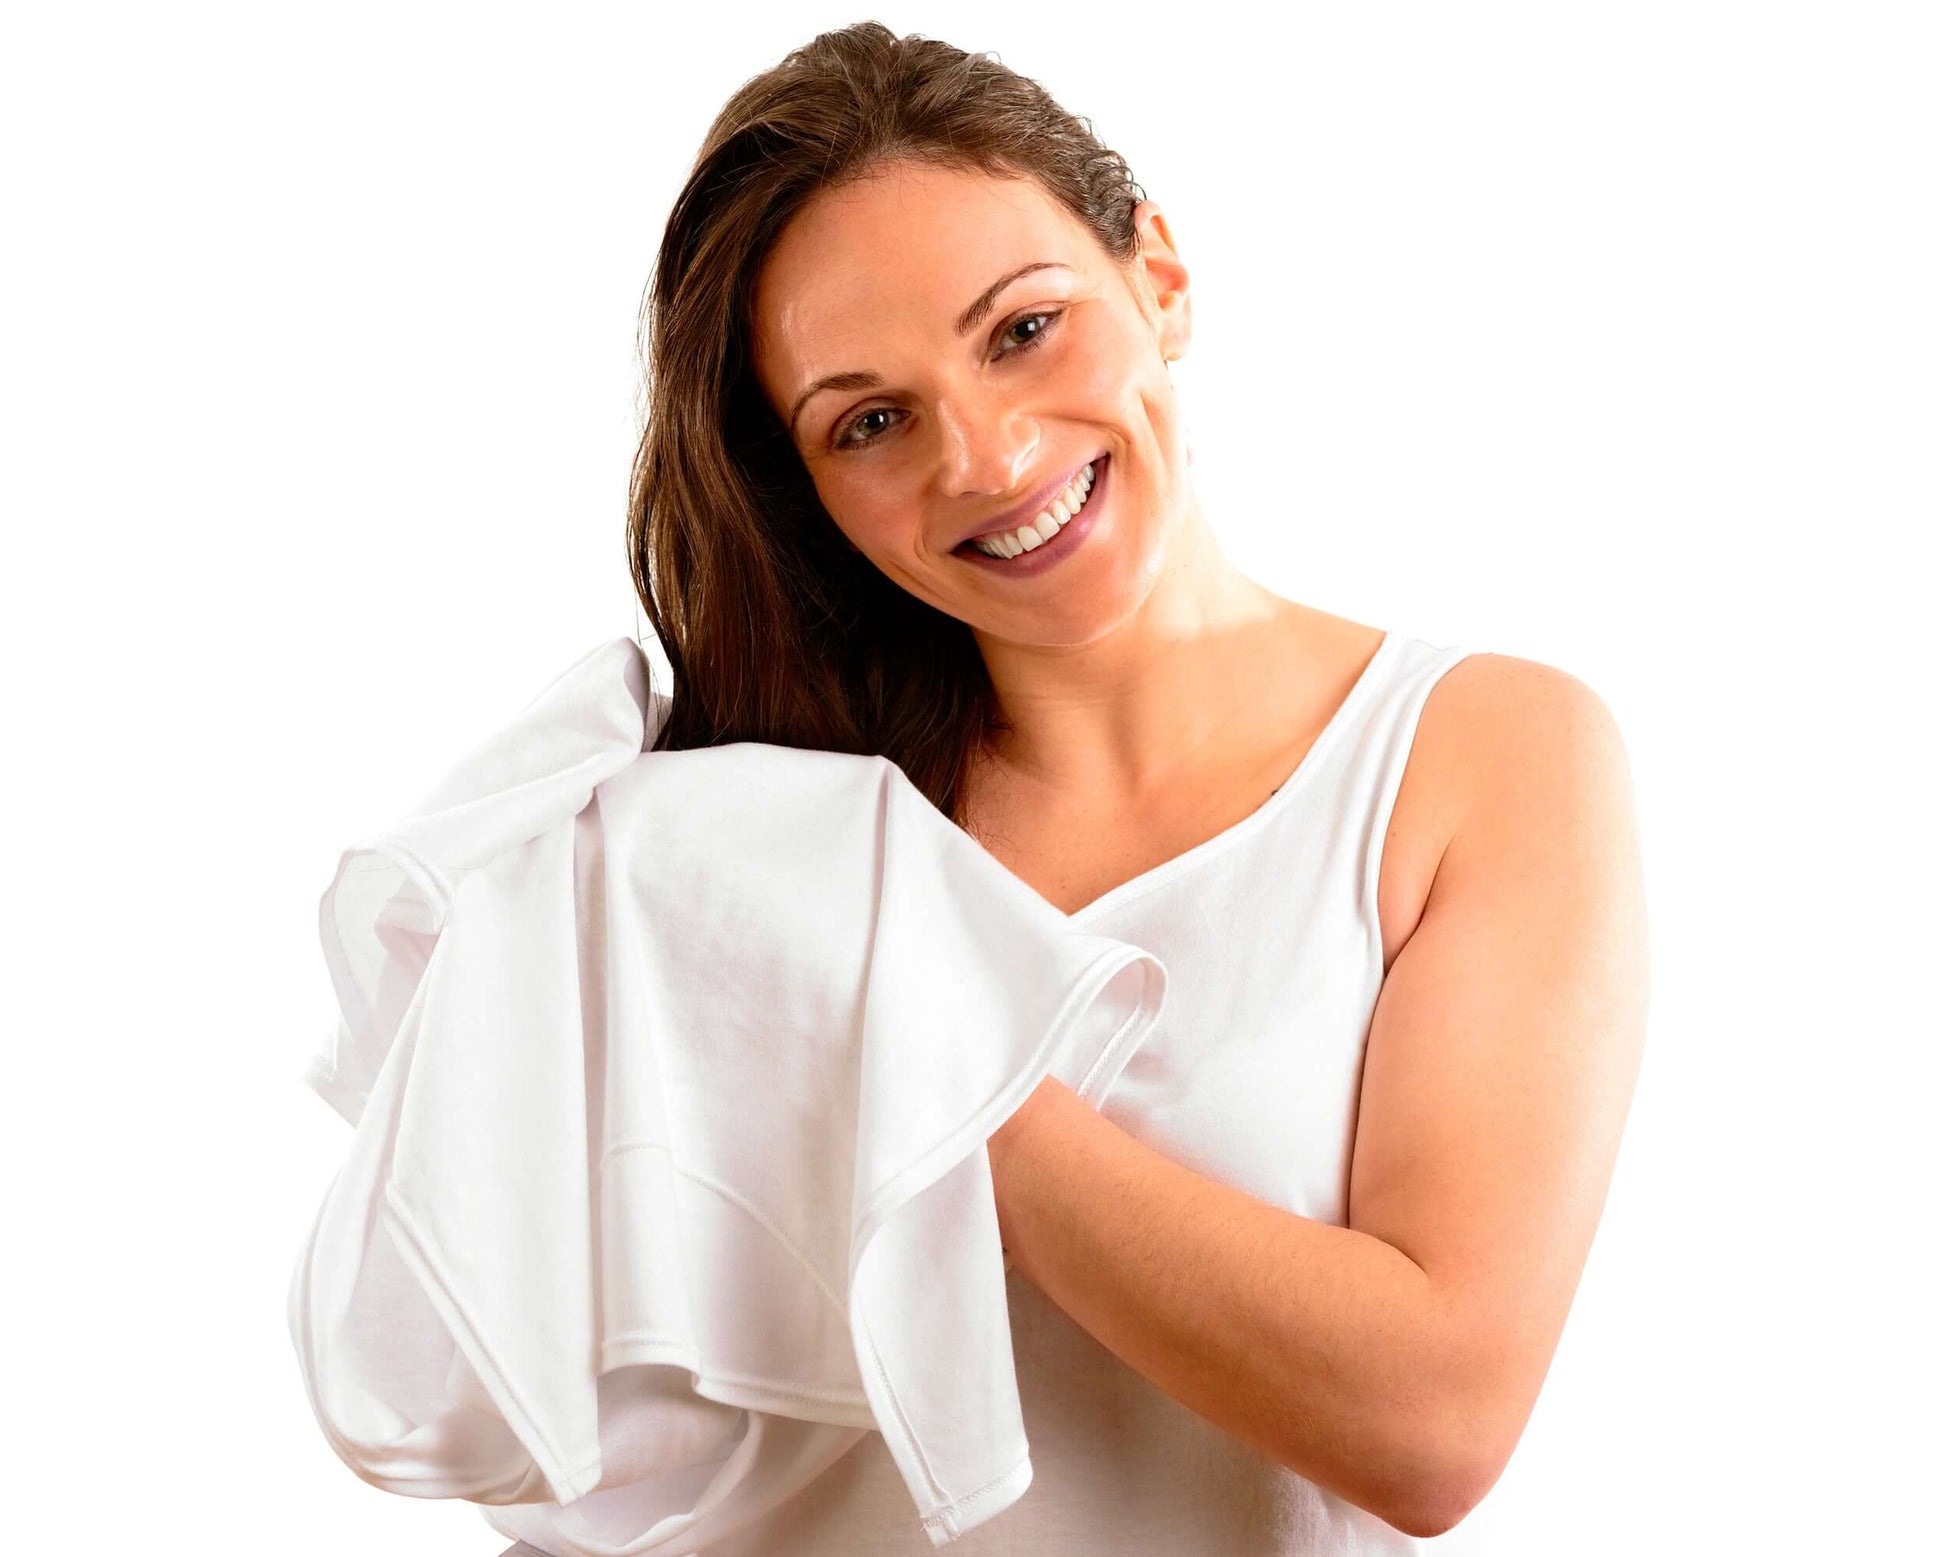 Ivory White T-Shirt Hair Towel for Curly, Wavy, and Straight Hair - Soft, Absorbent, and Eco-Friendly